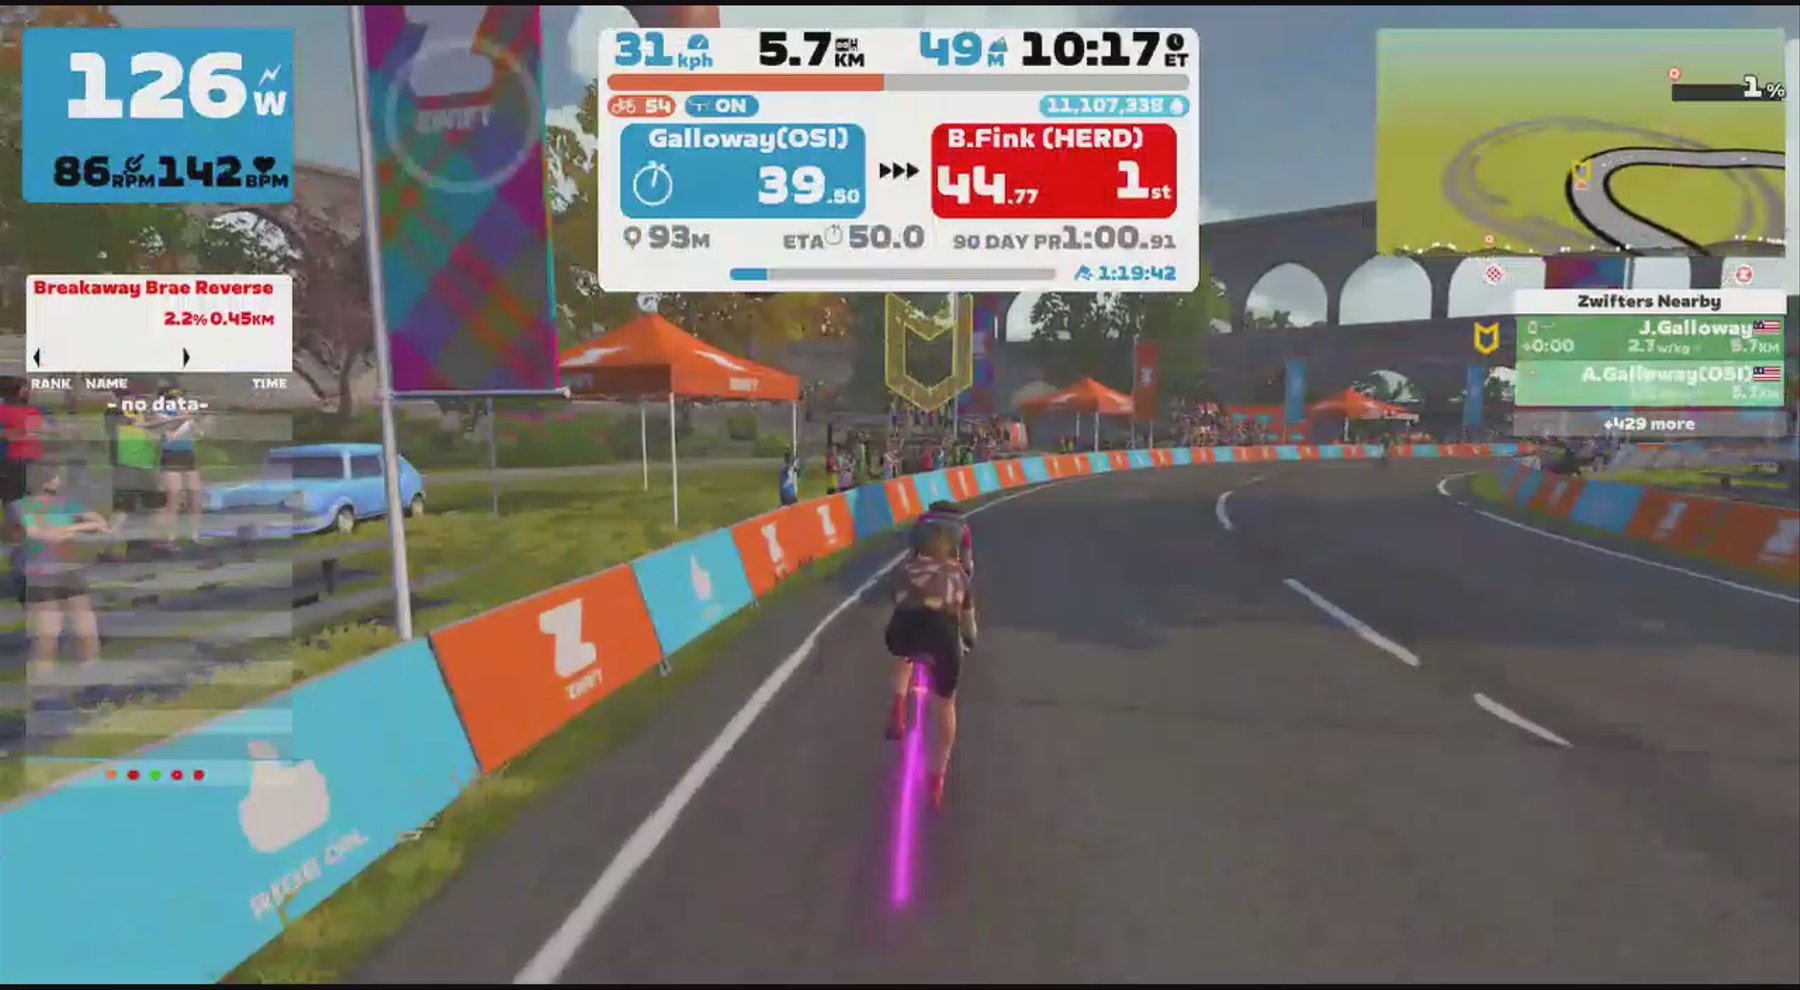 Zwift - James Galloway's Meetup on The Muckle Yin in Scotland